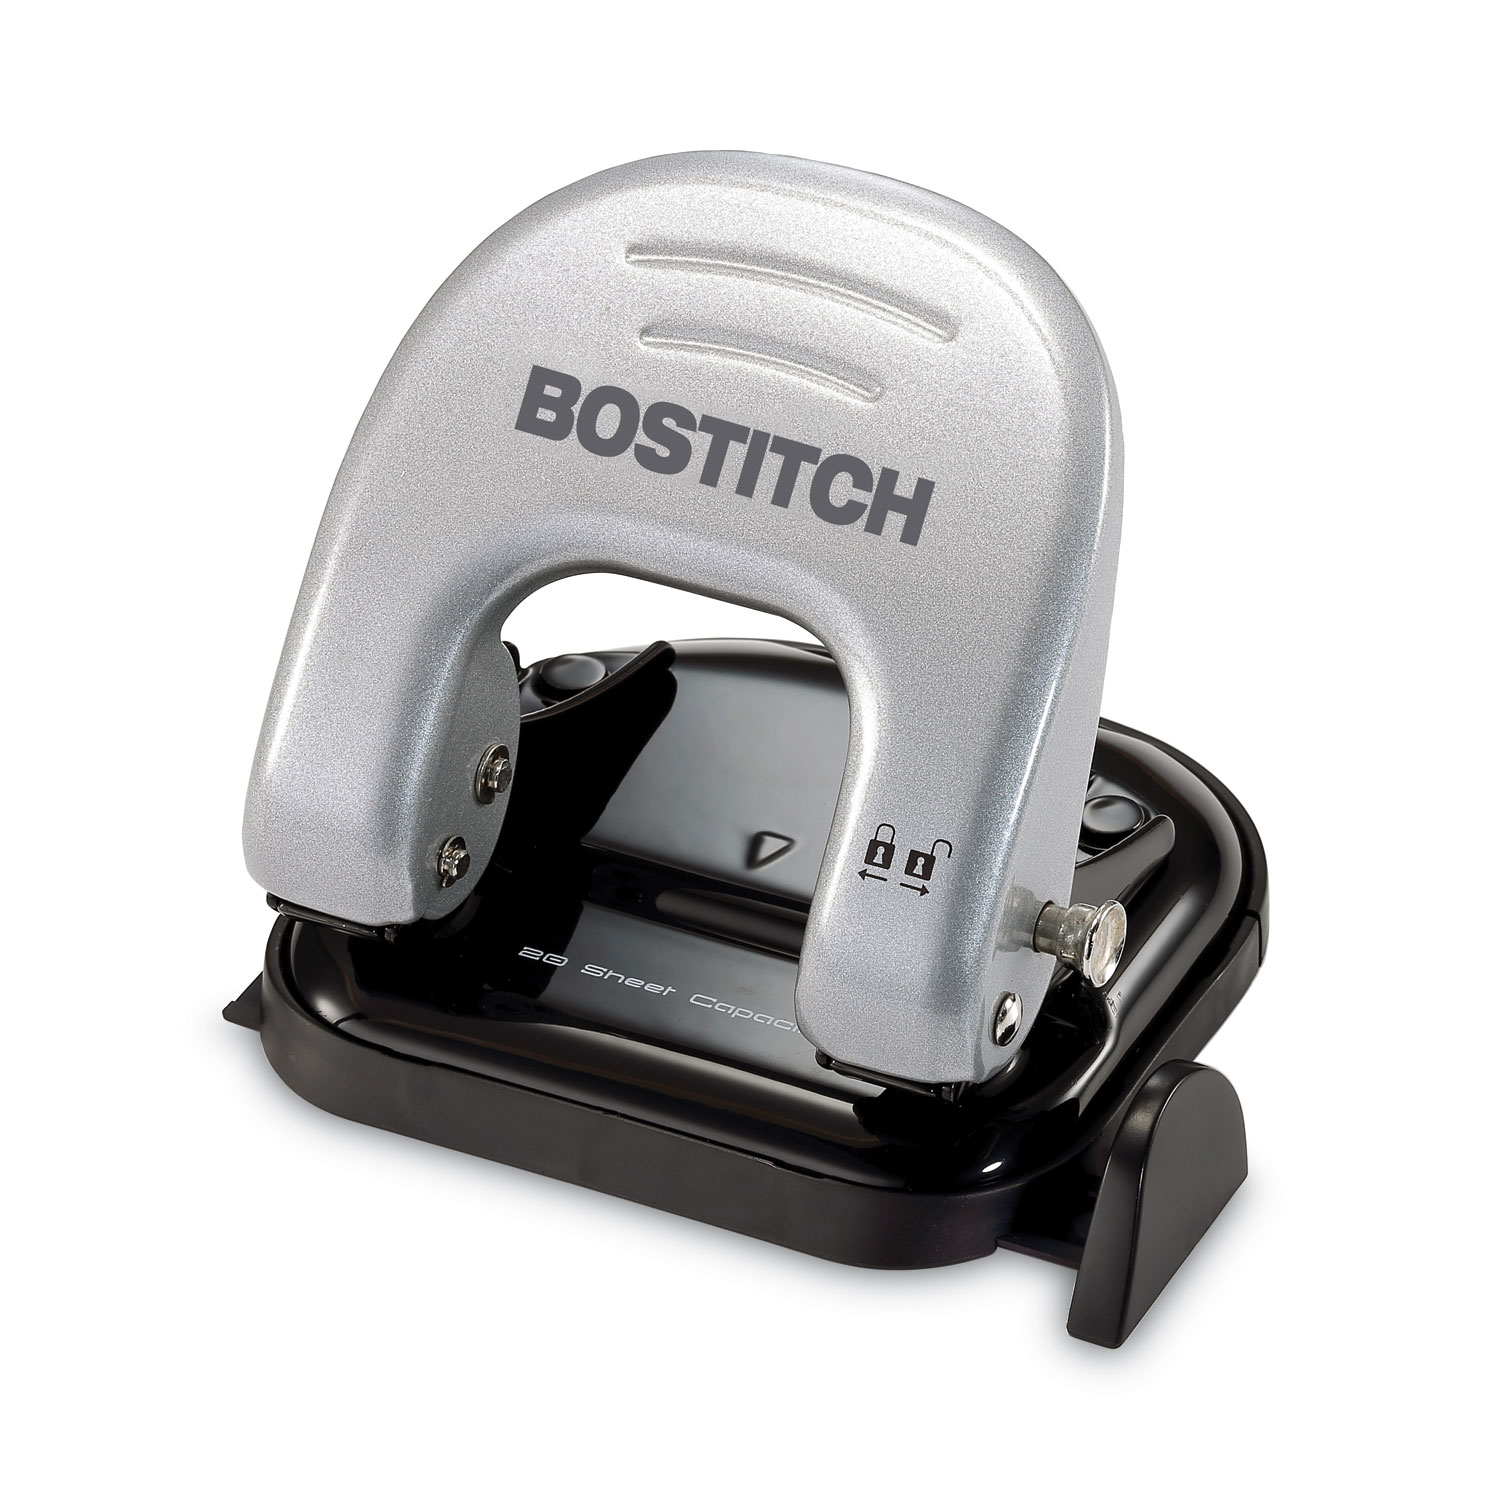 Bostitch EZ Squeeze™ 12 Three-Hole Punch - 3 Punch Head(s) - 12 Sheet -  9/32 Punch Size - 3 x 1.6 - Black, Silver - Filo CleanTech